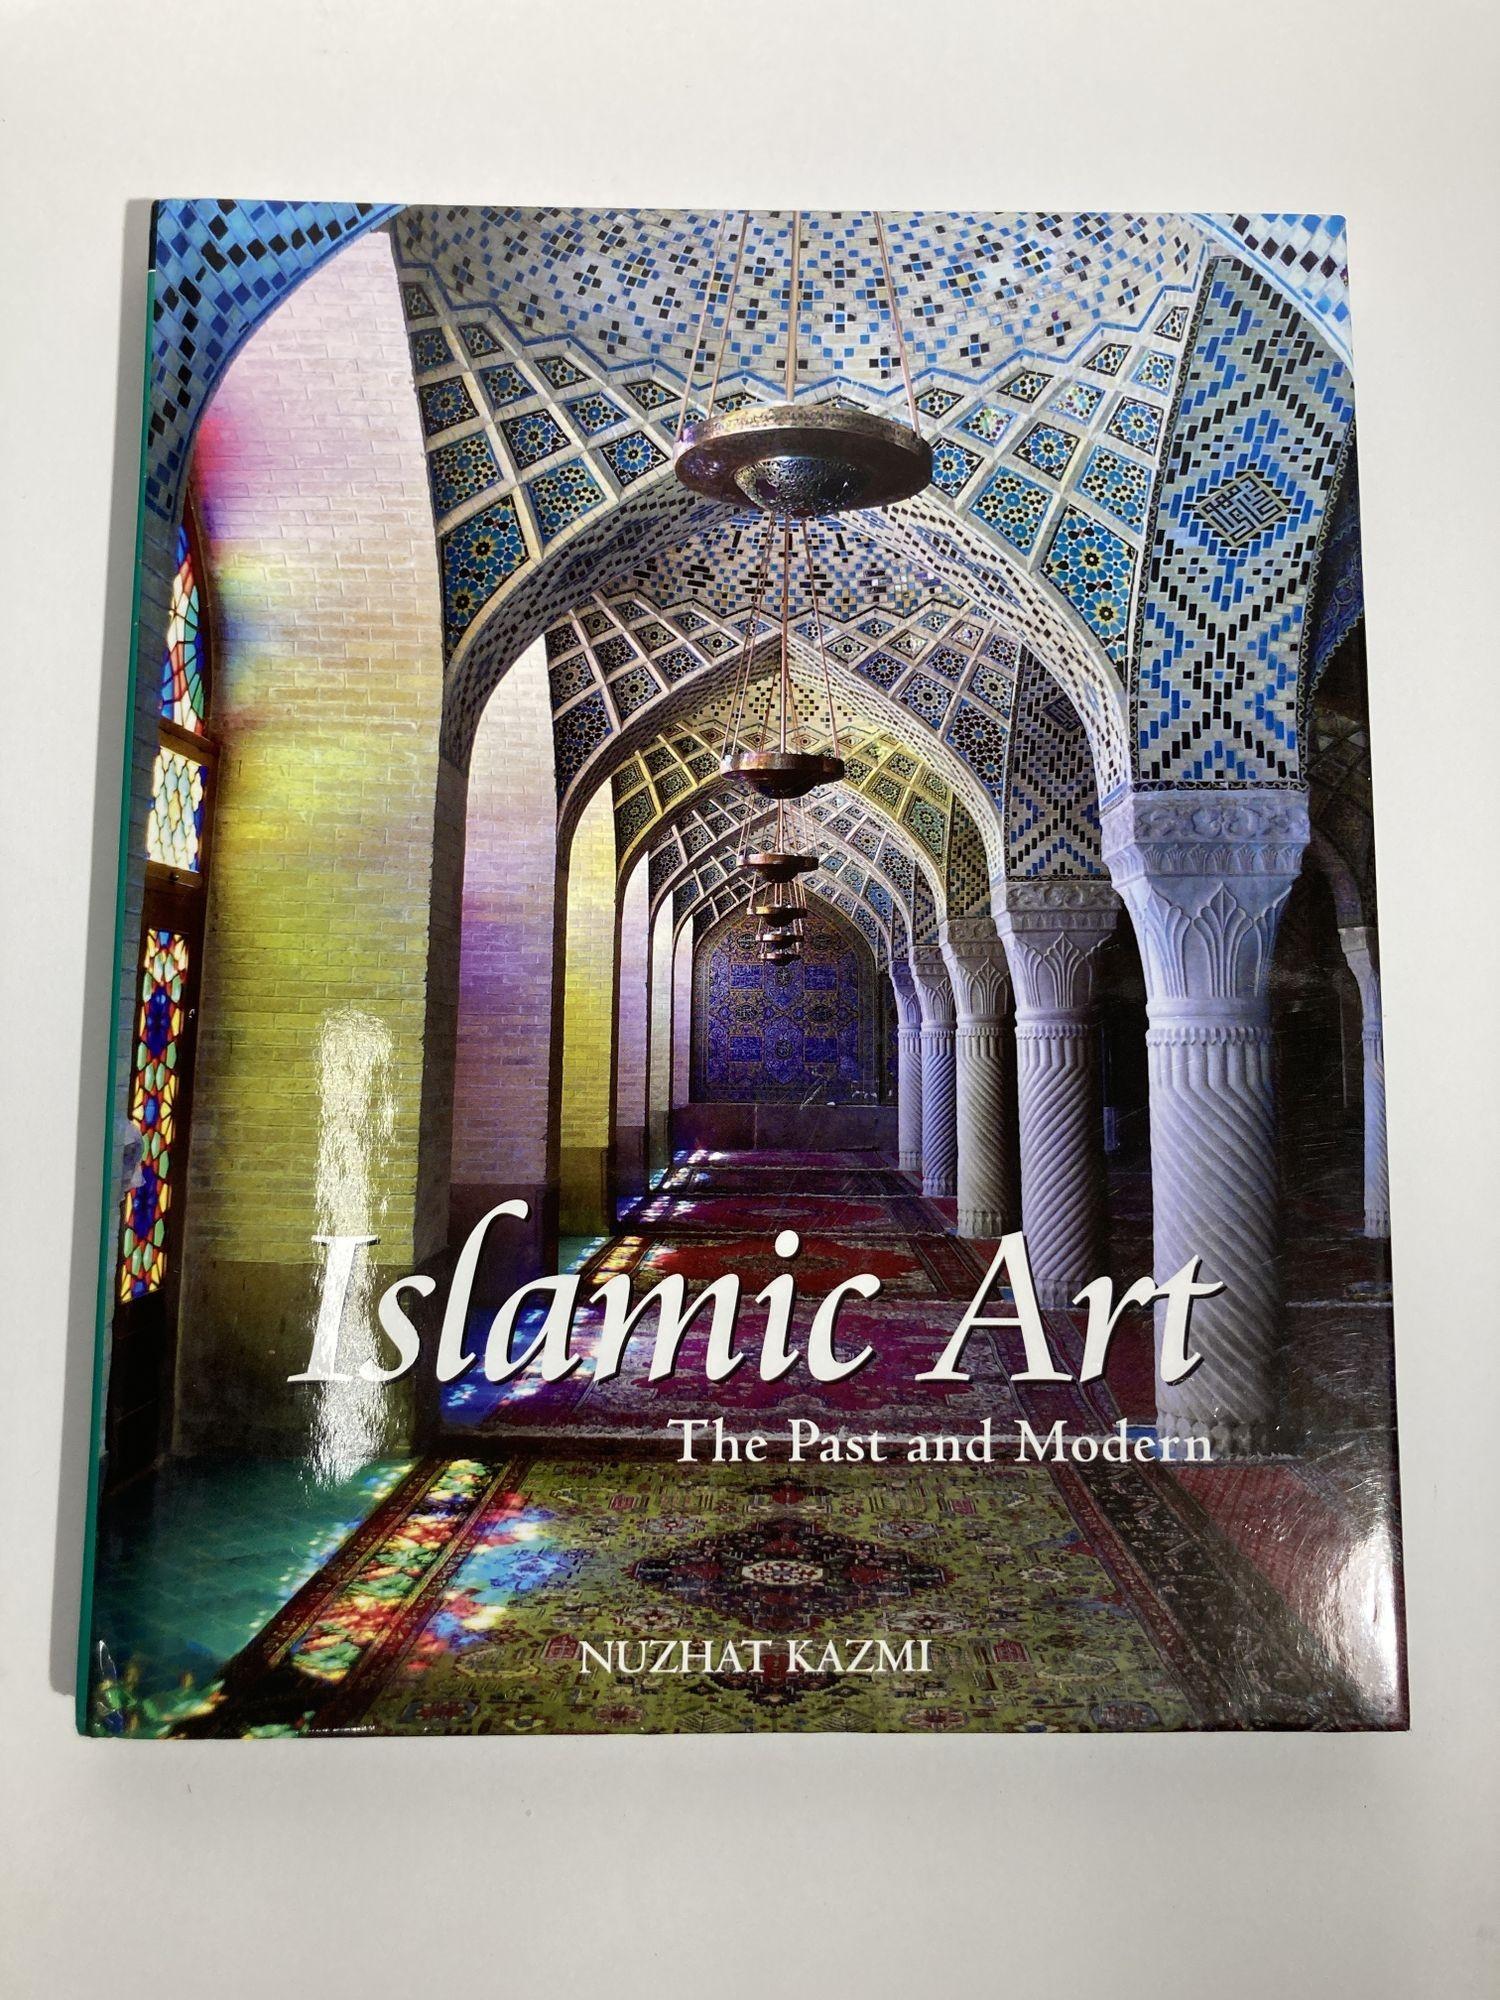 Islamic Art: the Past and Modern Nuzhat Kazmi
Published by Lustre/Roli Books (2009)

Lustre Press, 2009 - Islamic Architecture- 144 pages.
Hardcover book.
An exceptional copy, Particularly and surprisingly well-preserved; tight, bright, clean